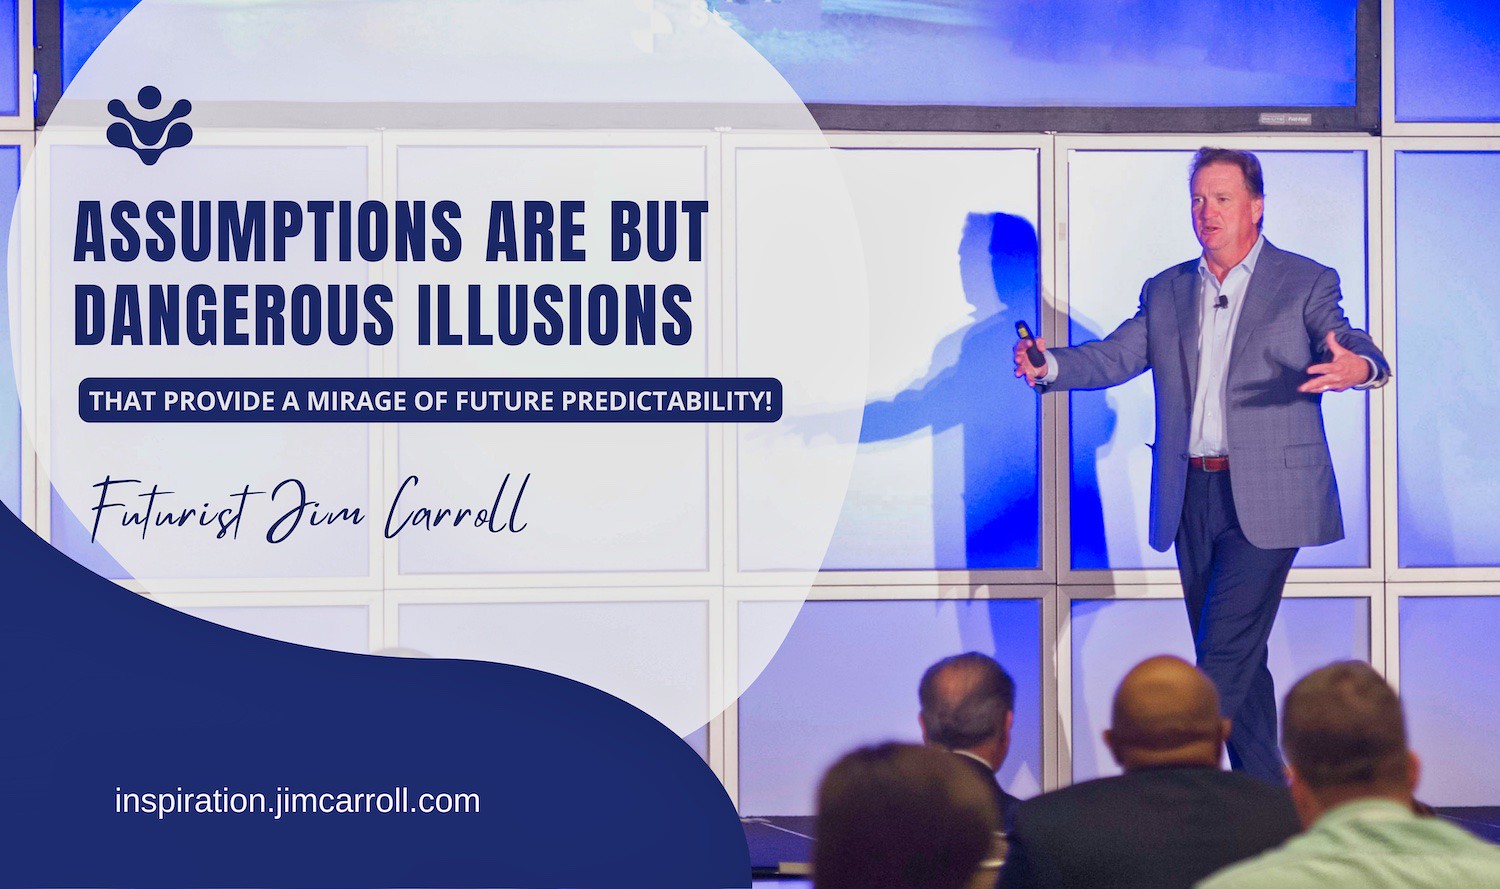 "Assumptions are but dangerous illusions that provide a mirage of future predictability!"